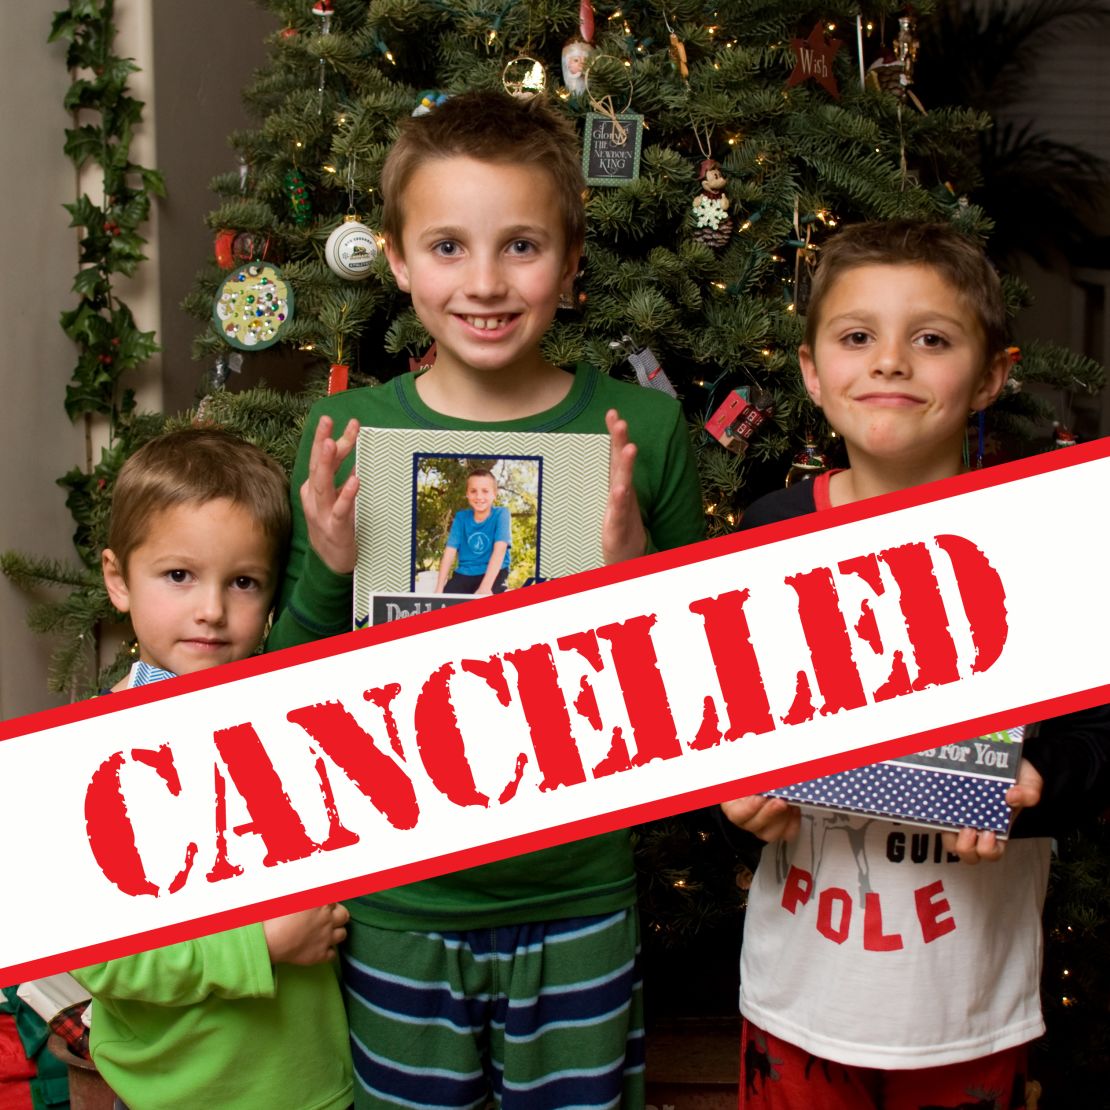 Christmas was canceled when the Henderson boys wouldn't behave